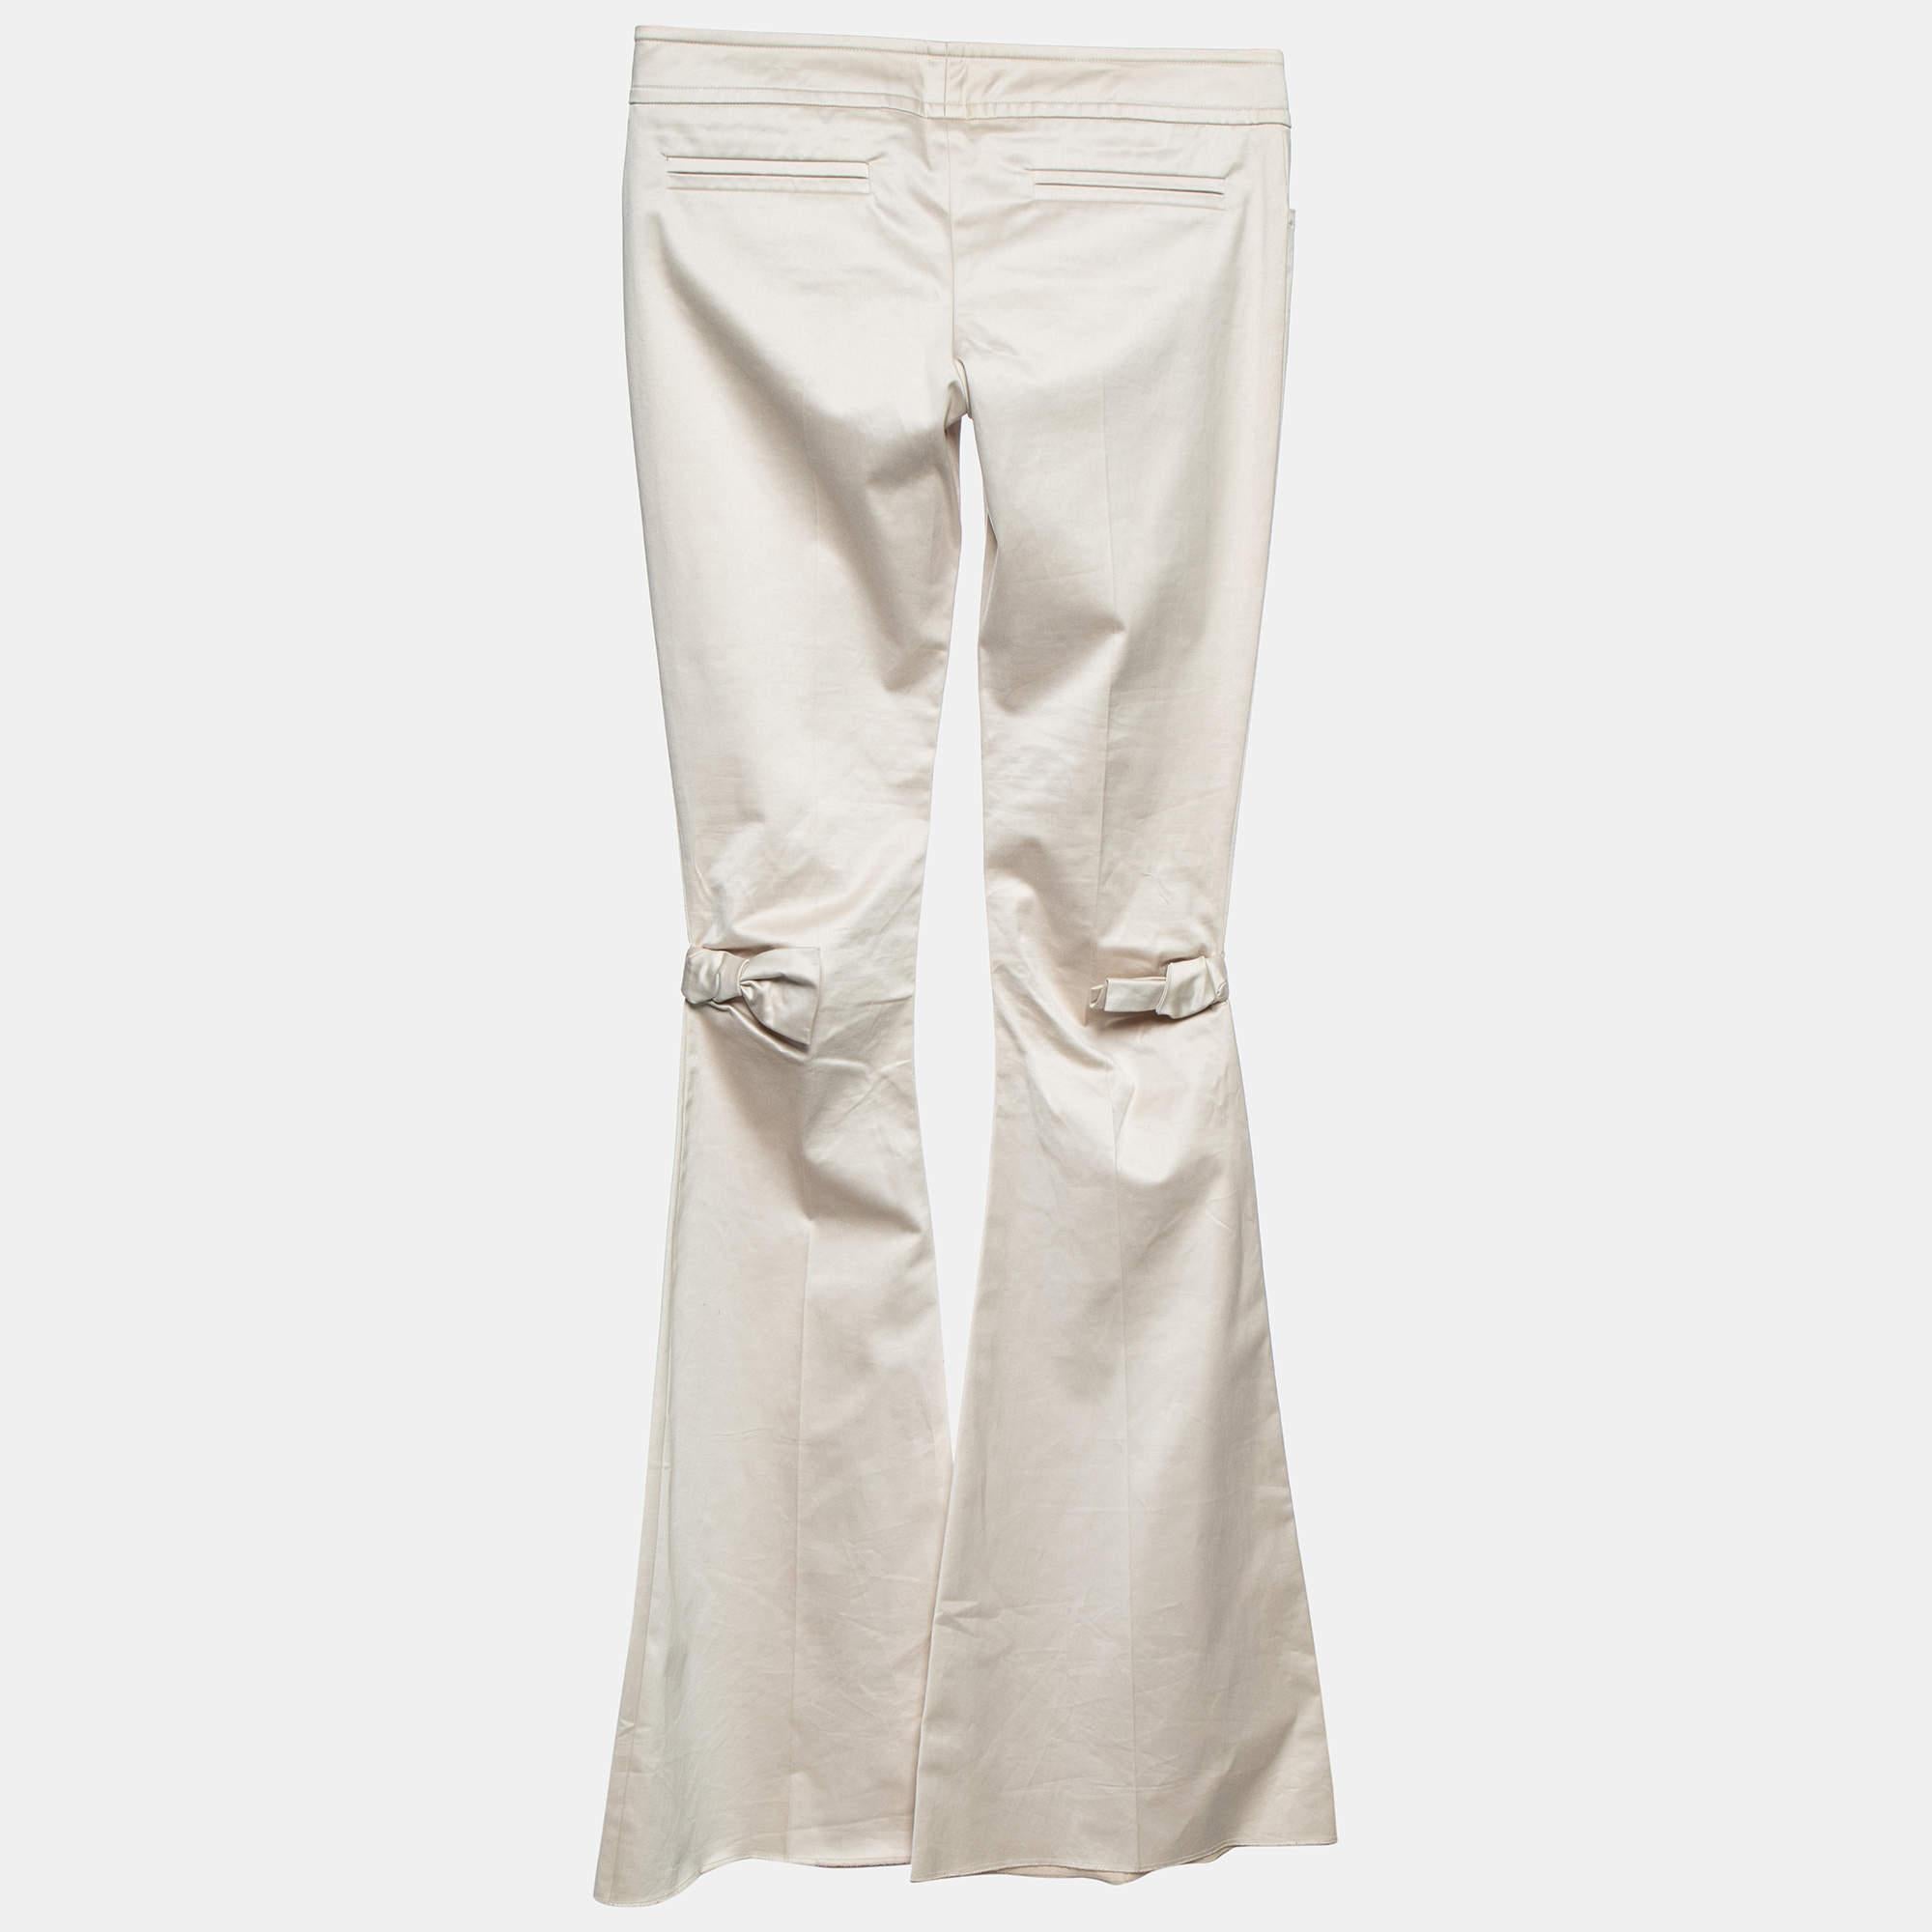 Impeccably tailored pants are a staple in a well-curated wardrobe. These designer trousers are finely sewn to give you the desired look and all-day comfort.

Includes: 
Price Tag
